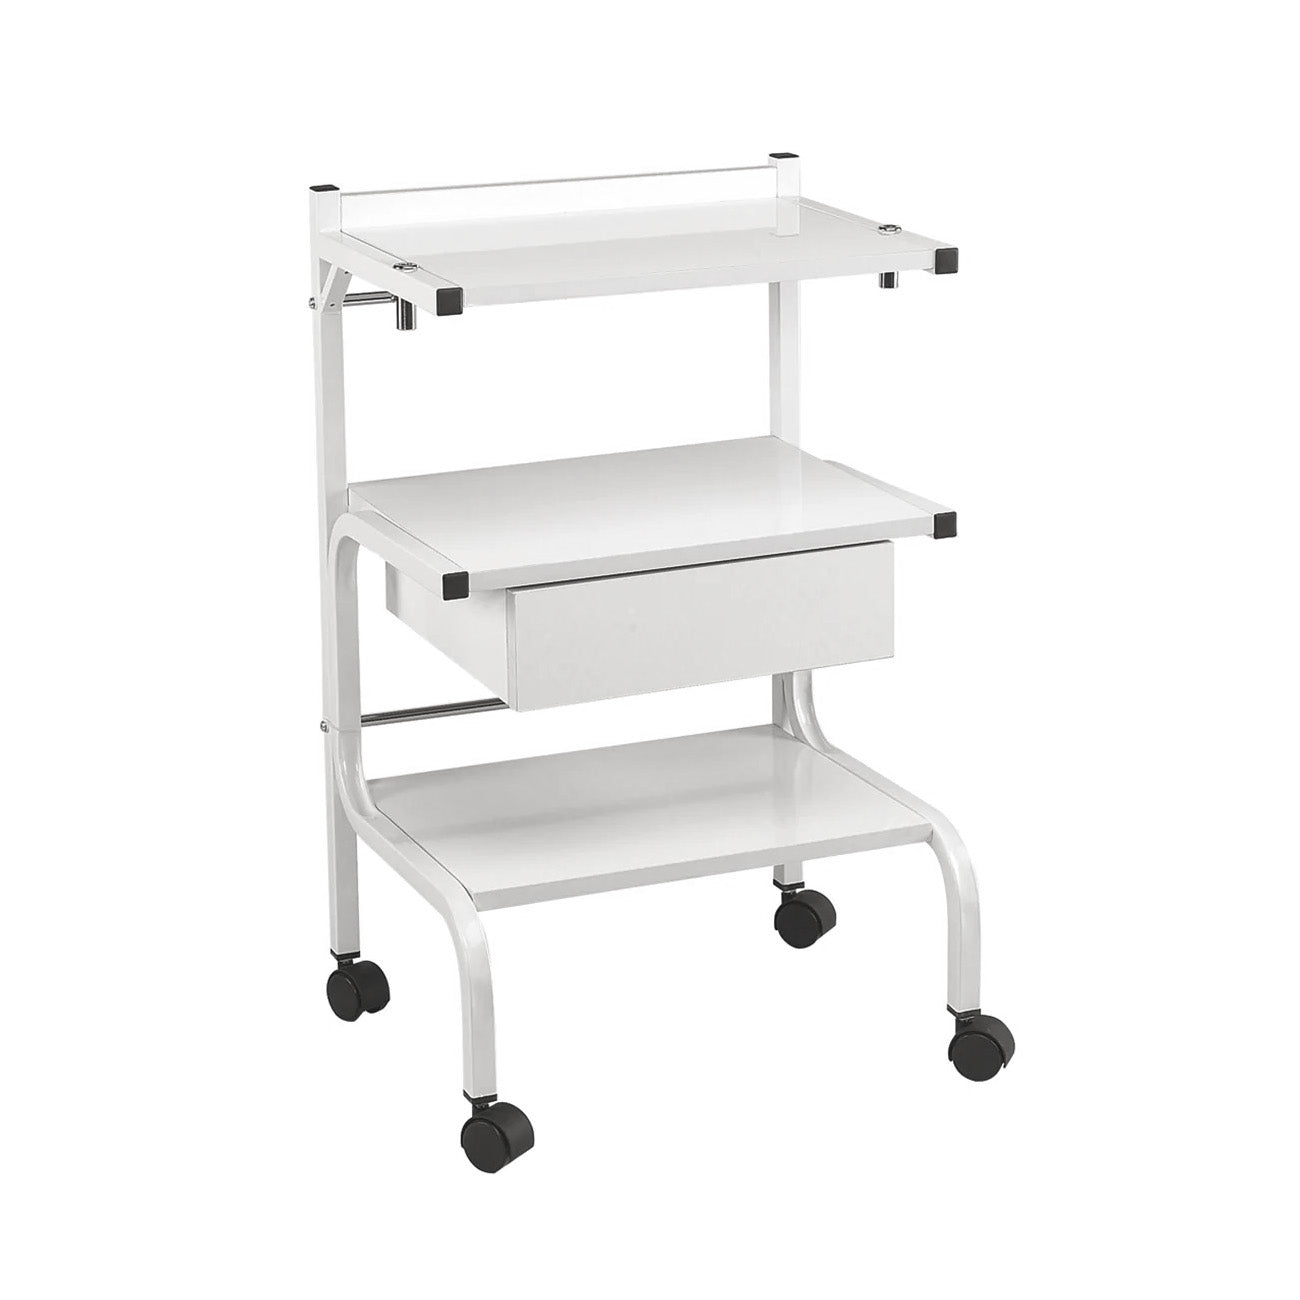 H2 Spa Utility Cart - Collins - Salon Equipment and Barber Equipment